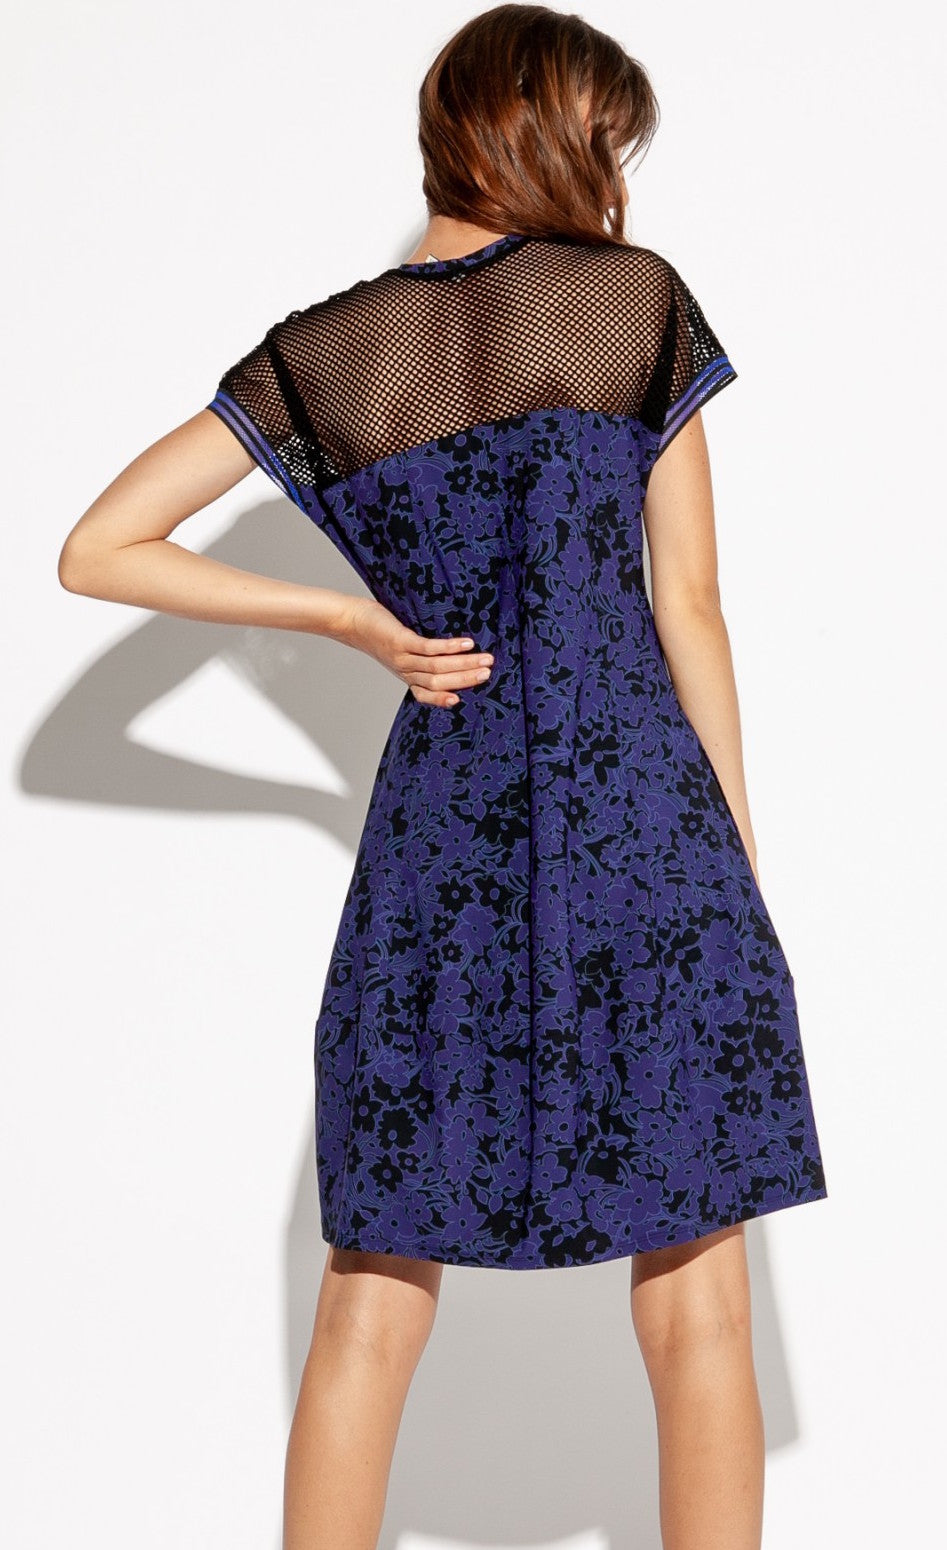 Back full body view of a woman with her left hand on her hip and wearing the Indies Skipy Dress. This dress is indigo blue and black with a floral print and black mesh on the shoulders and short sleeves. The dress is loose fitting with a slightly fitted waist and a cut that sits above the knees.